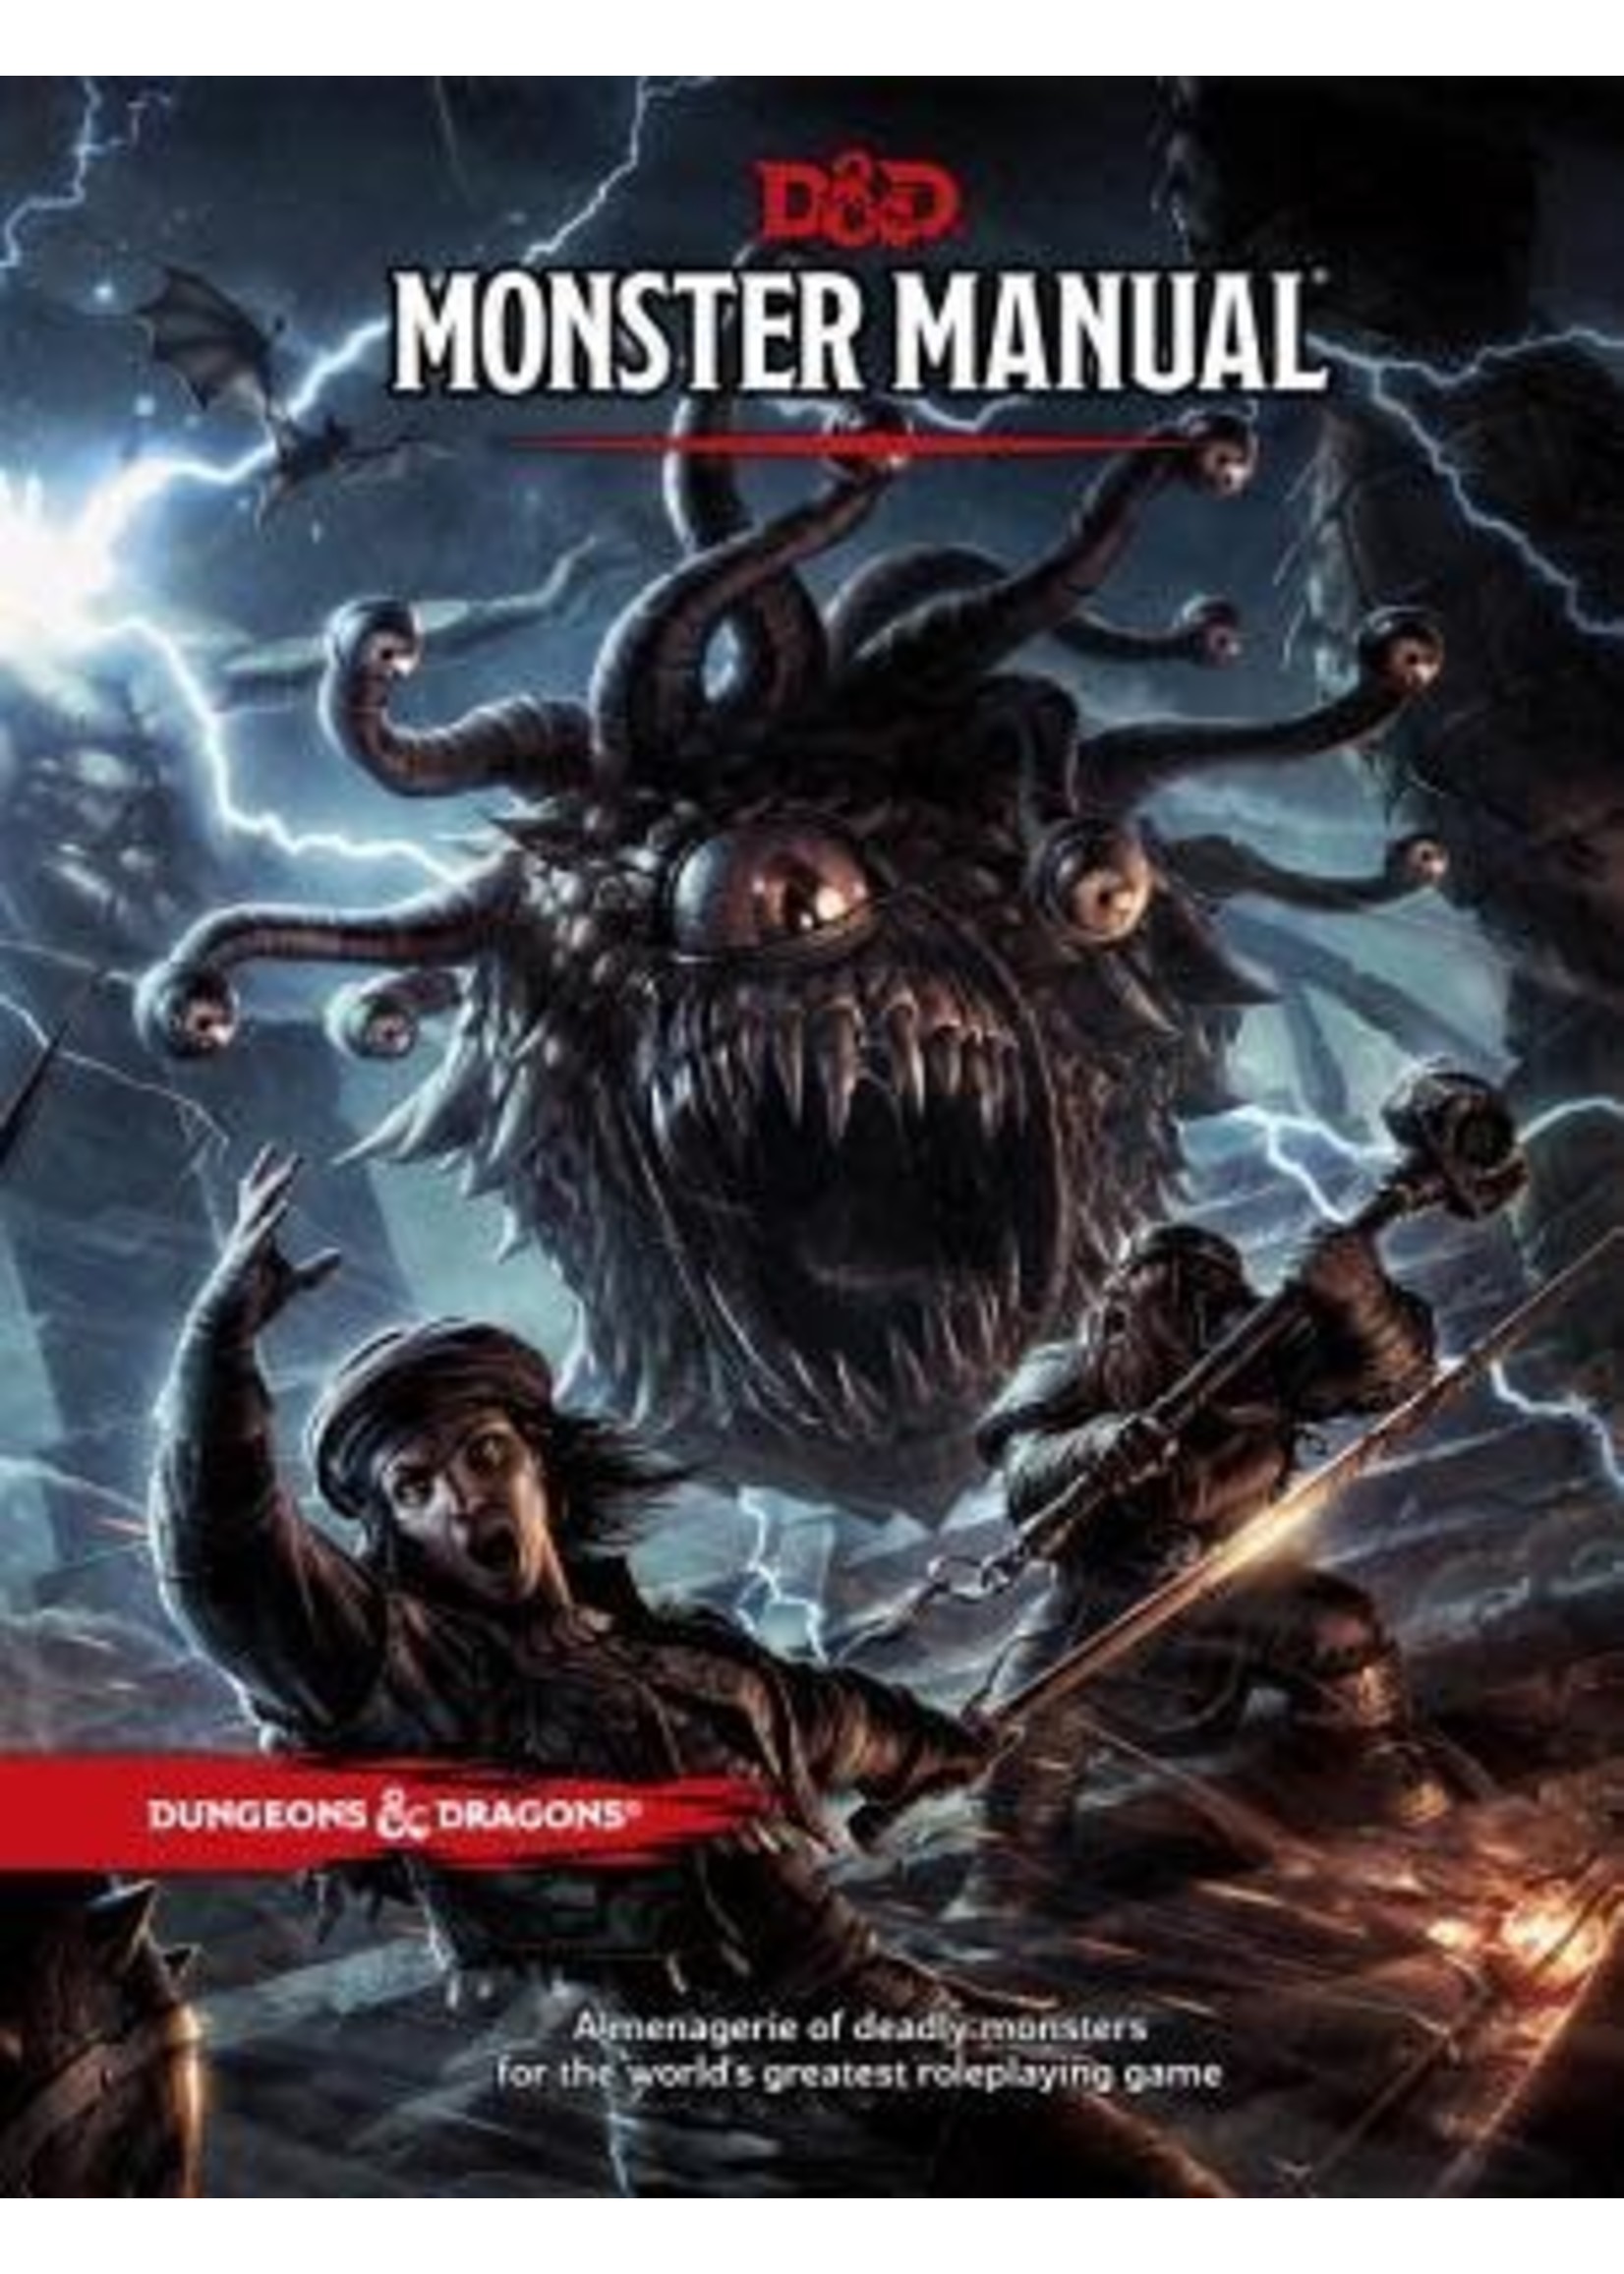 Monster Manual (Dungeons & Dragons, 5th Edition) by Wizards of the Coast